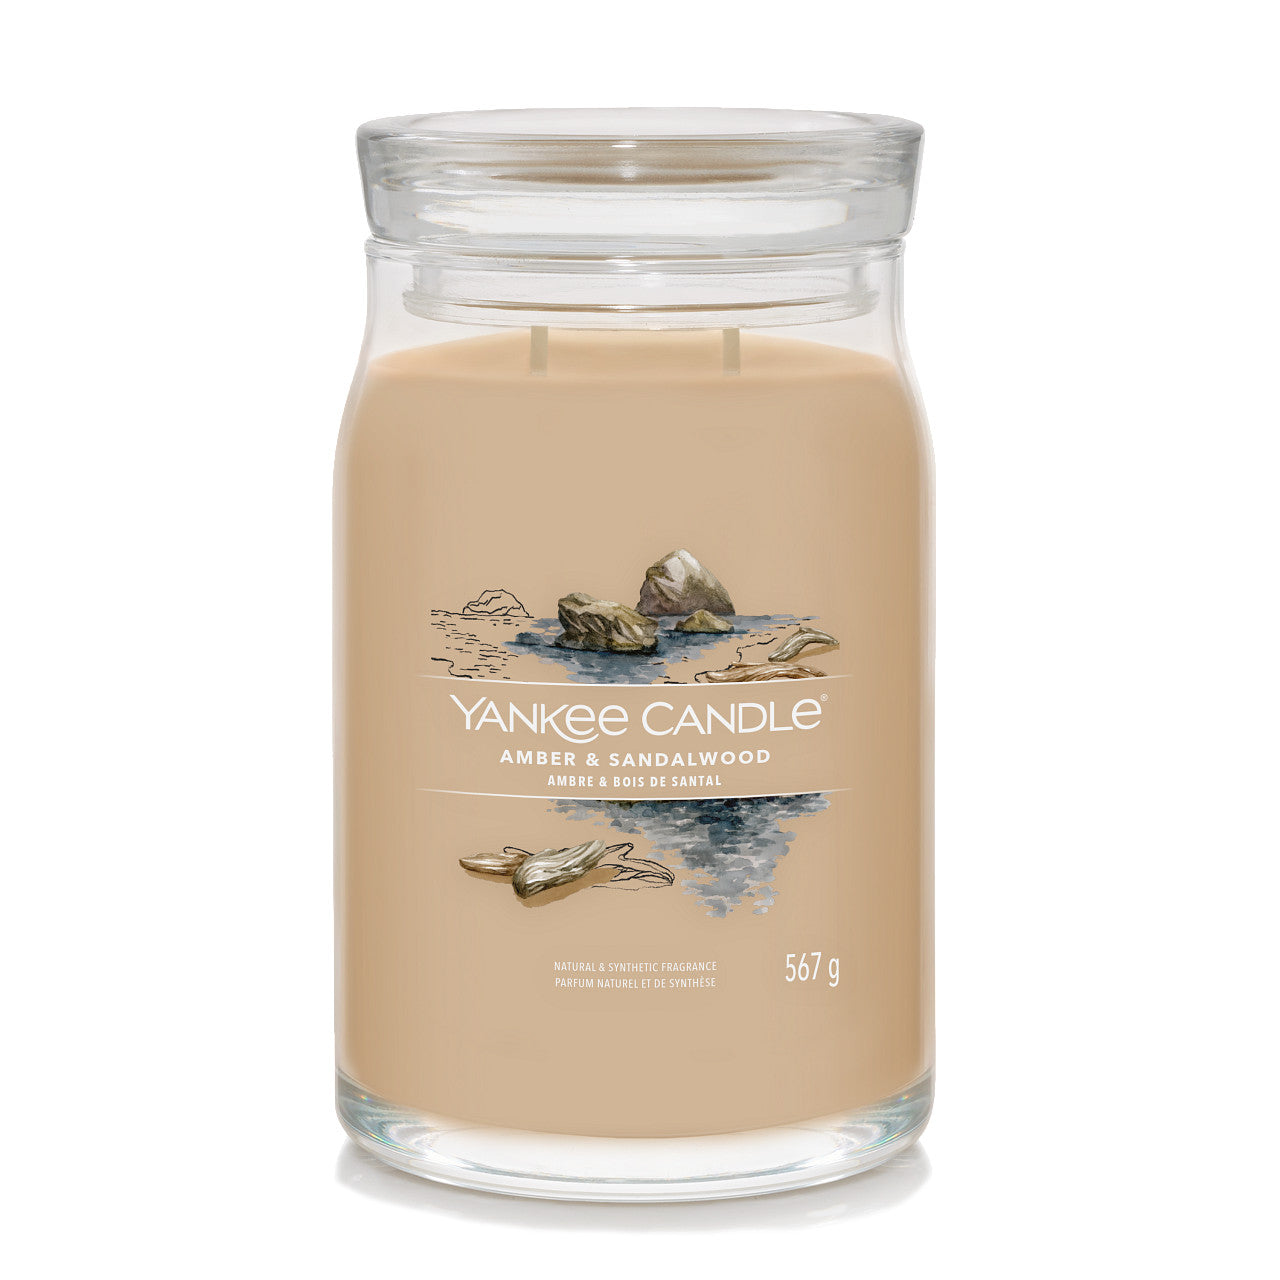 Amber and Sandalwood - Signature Large Jar Scented Candle